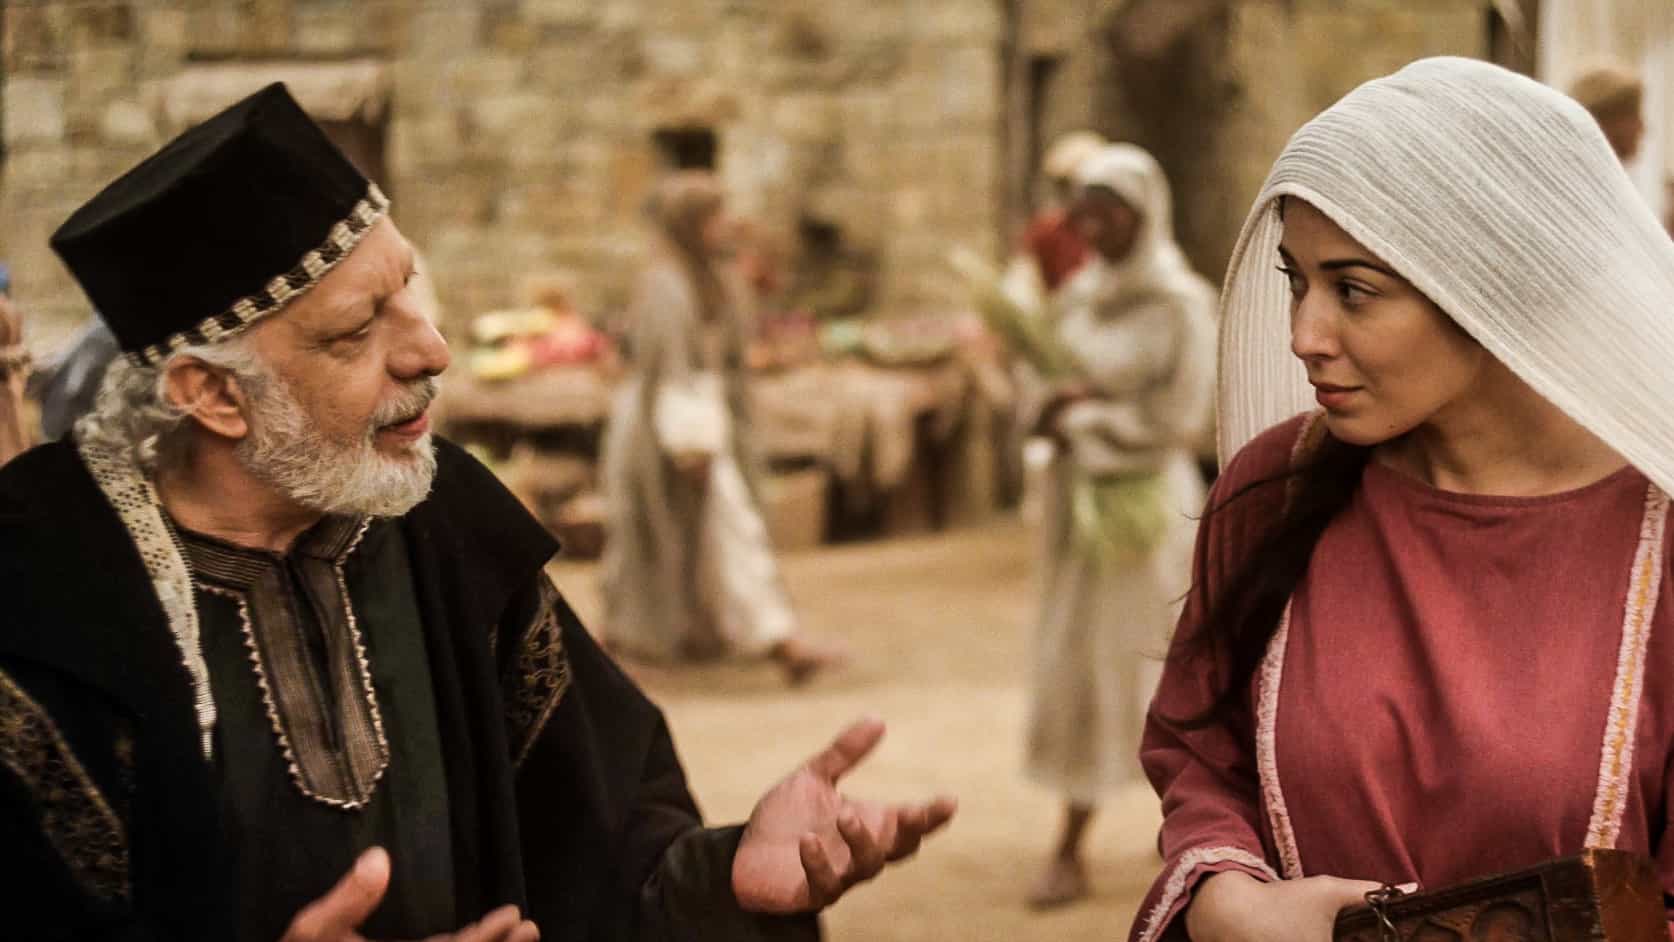 a man and women in middle eastern costume are opposite each other and in conversation